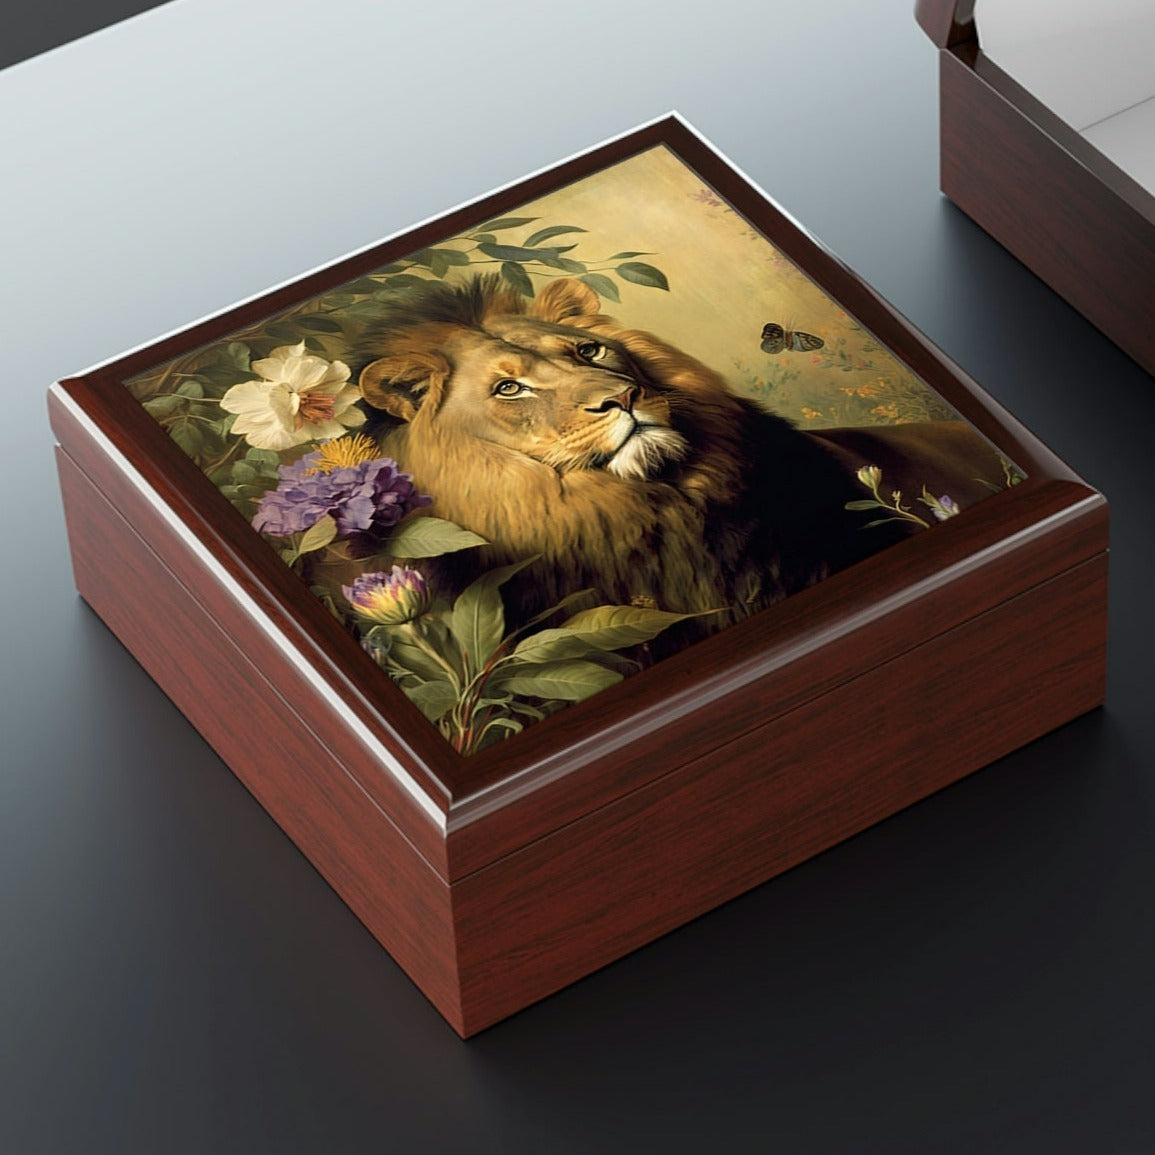 Vintage African Lion Wood Keepsake Jewelry Box with Ceramic Tile Cover